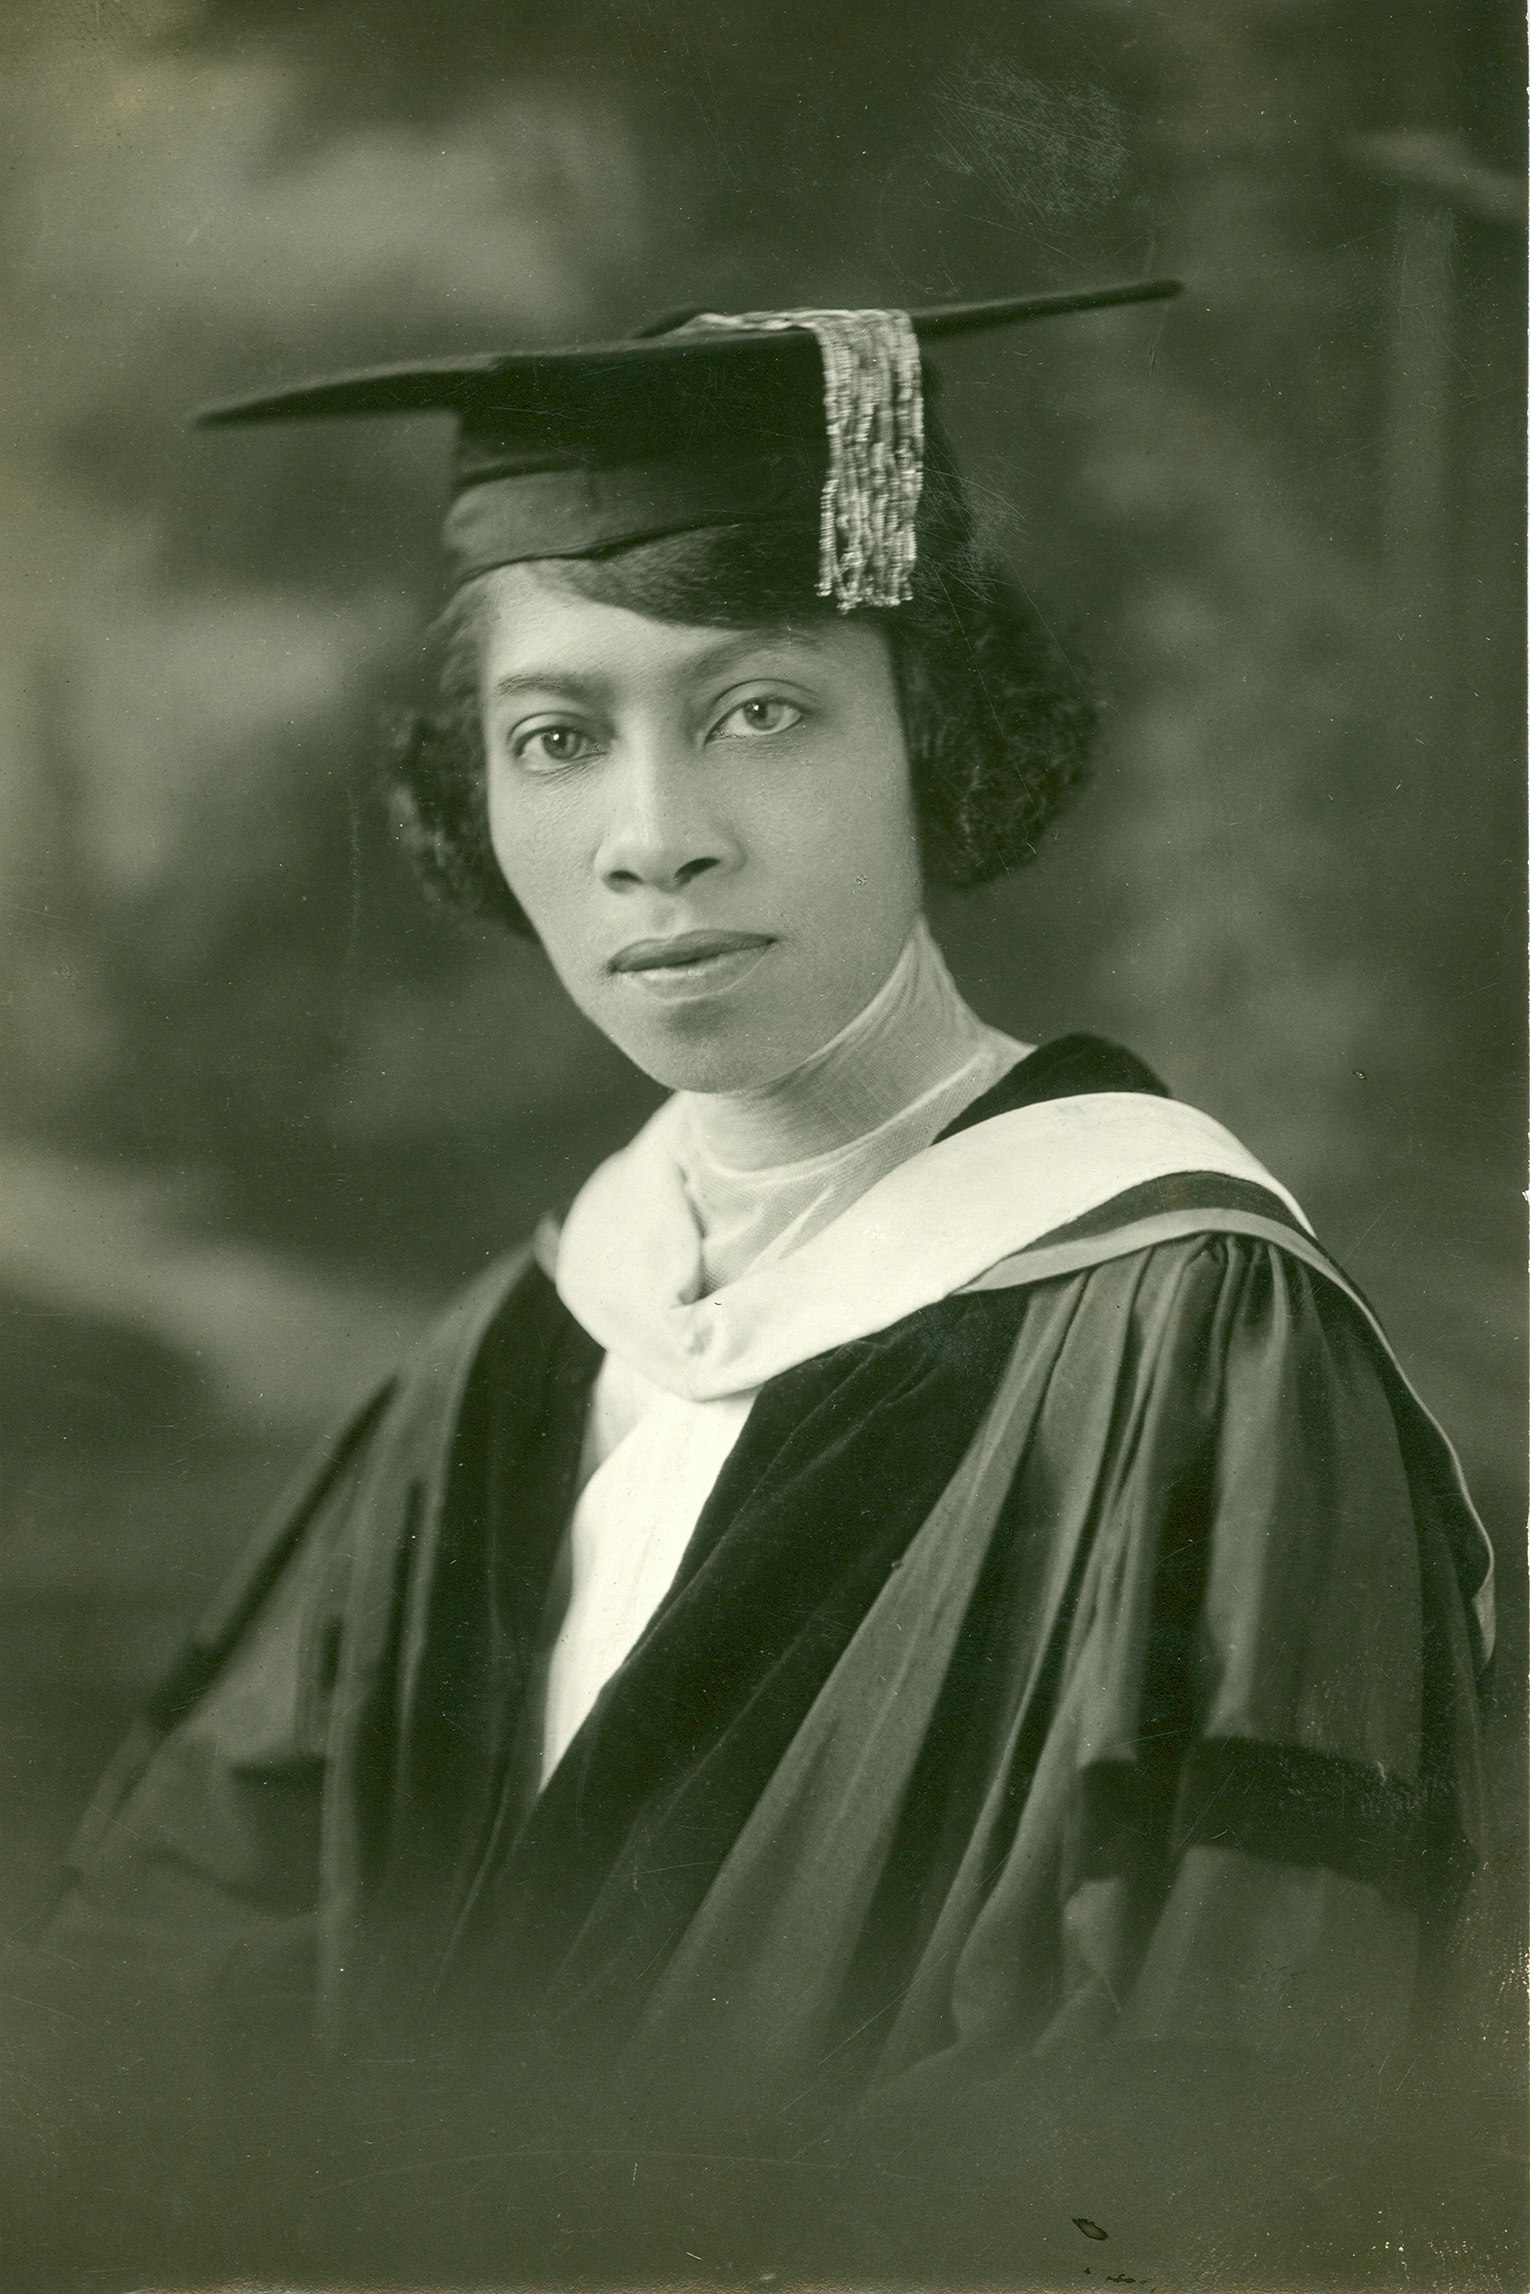 Black-and-white portrait of Eva B. Dykes at graduation: bust portrait in three quarter profile of a young woman in academic robe and cap.